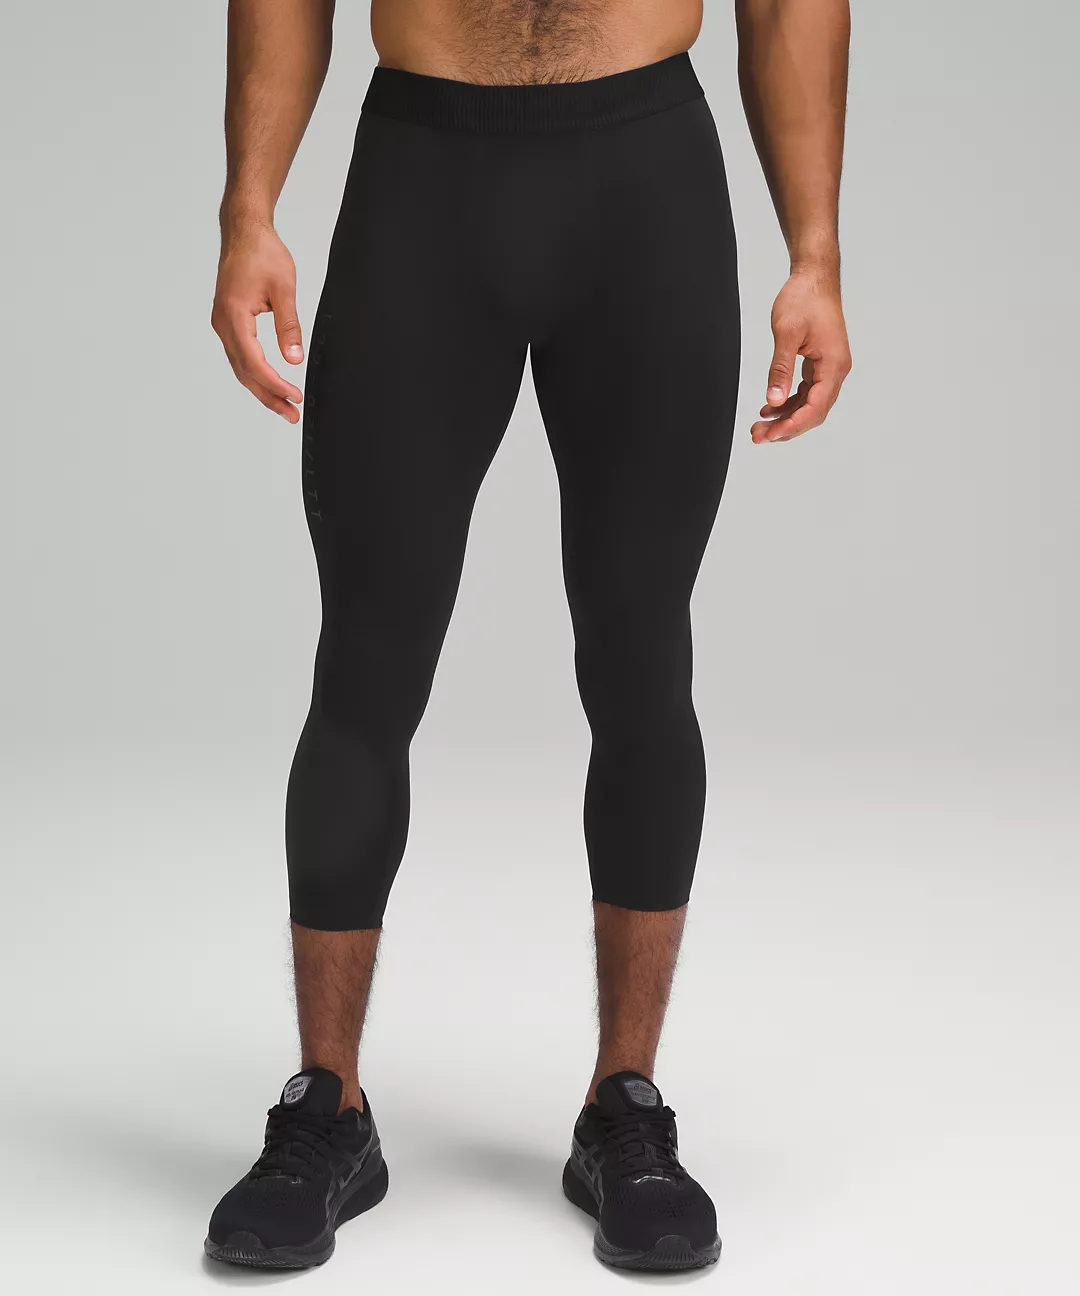 The Truth About lululemon Mens Clothing: 11 Bestsellers for Yoga ...